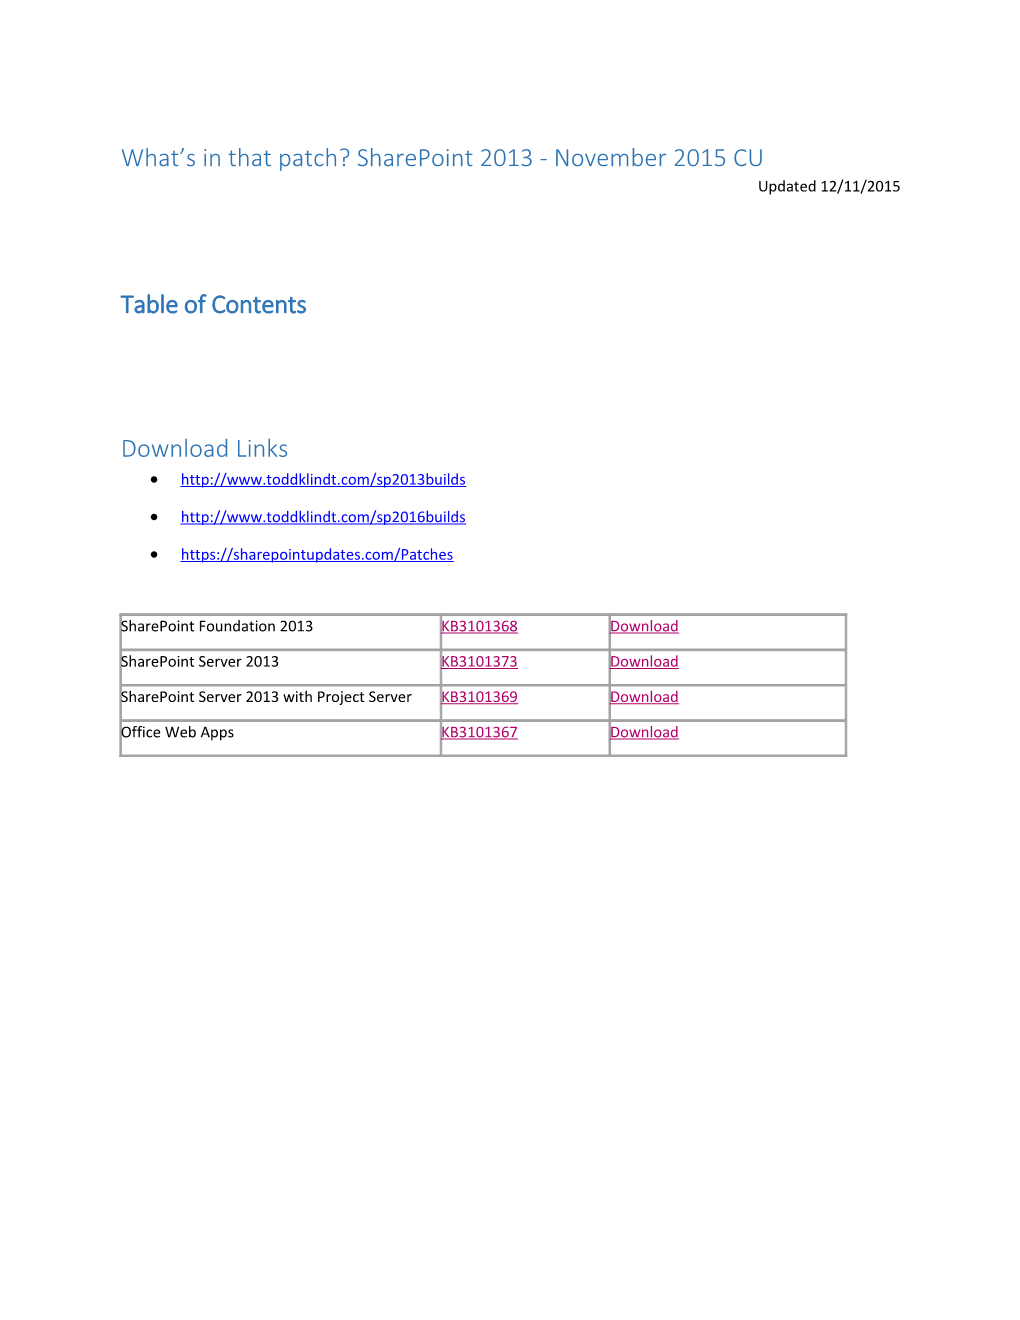 What S in That Patch?Sharepoint2013 - November 2015 CU